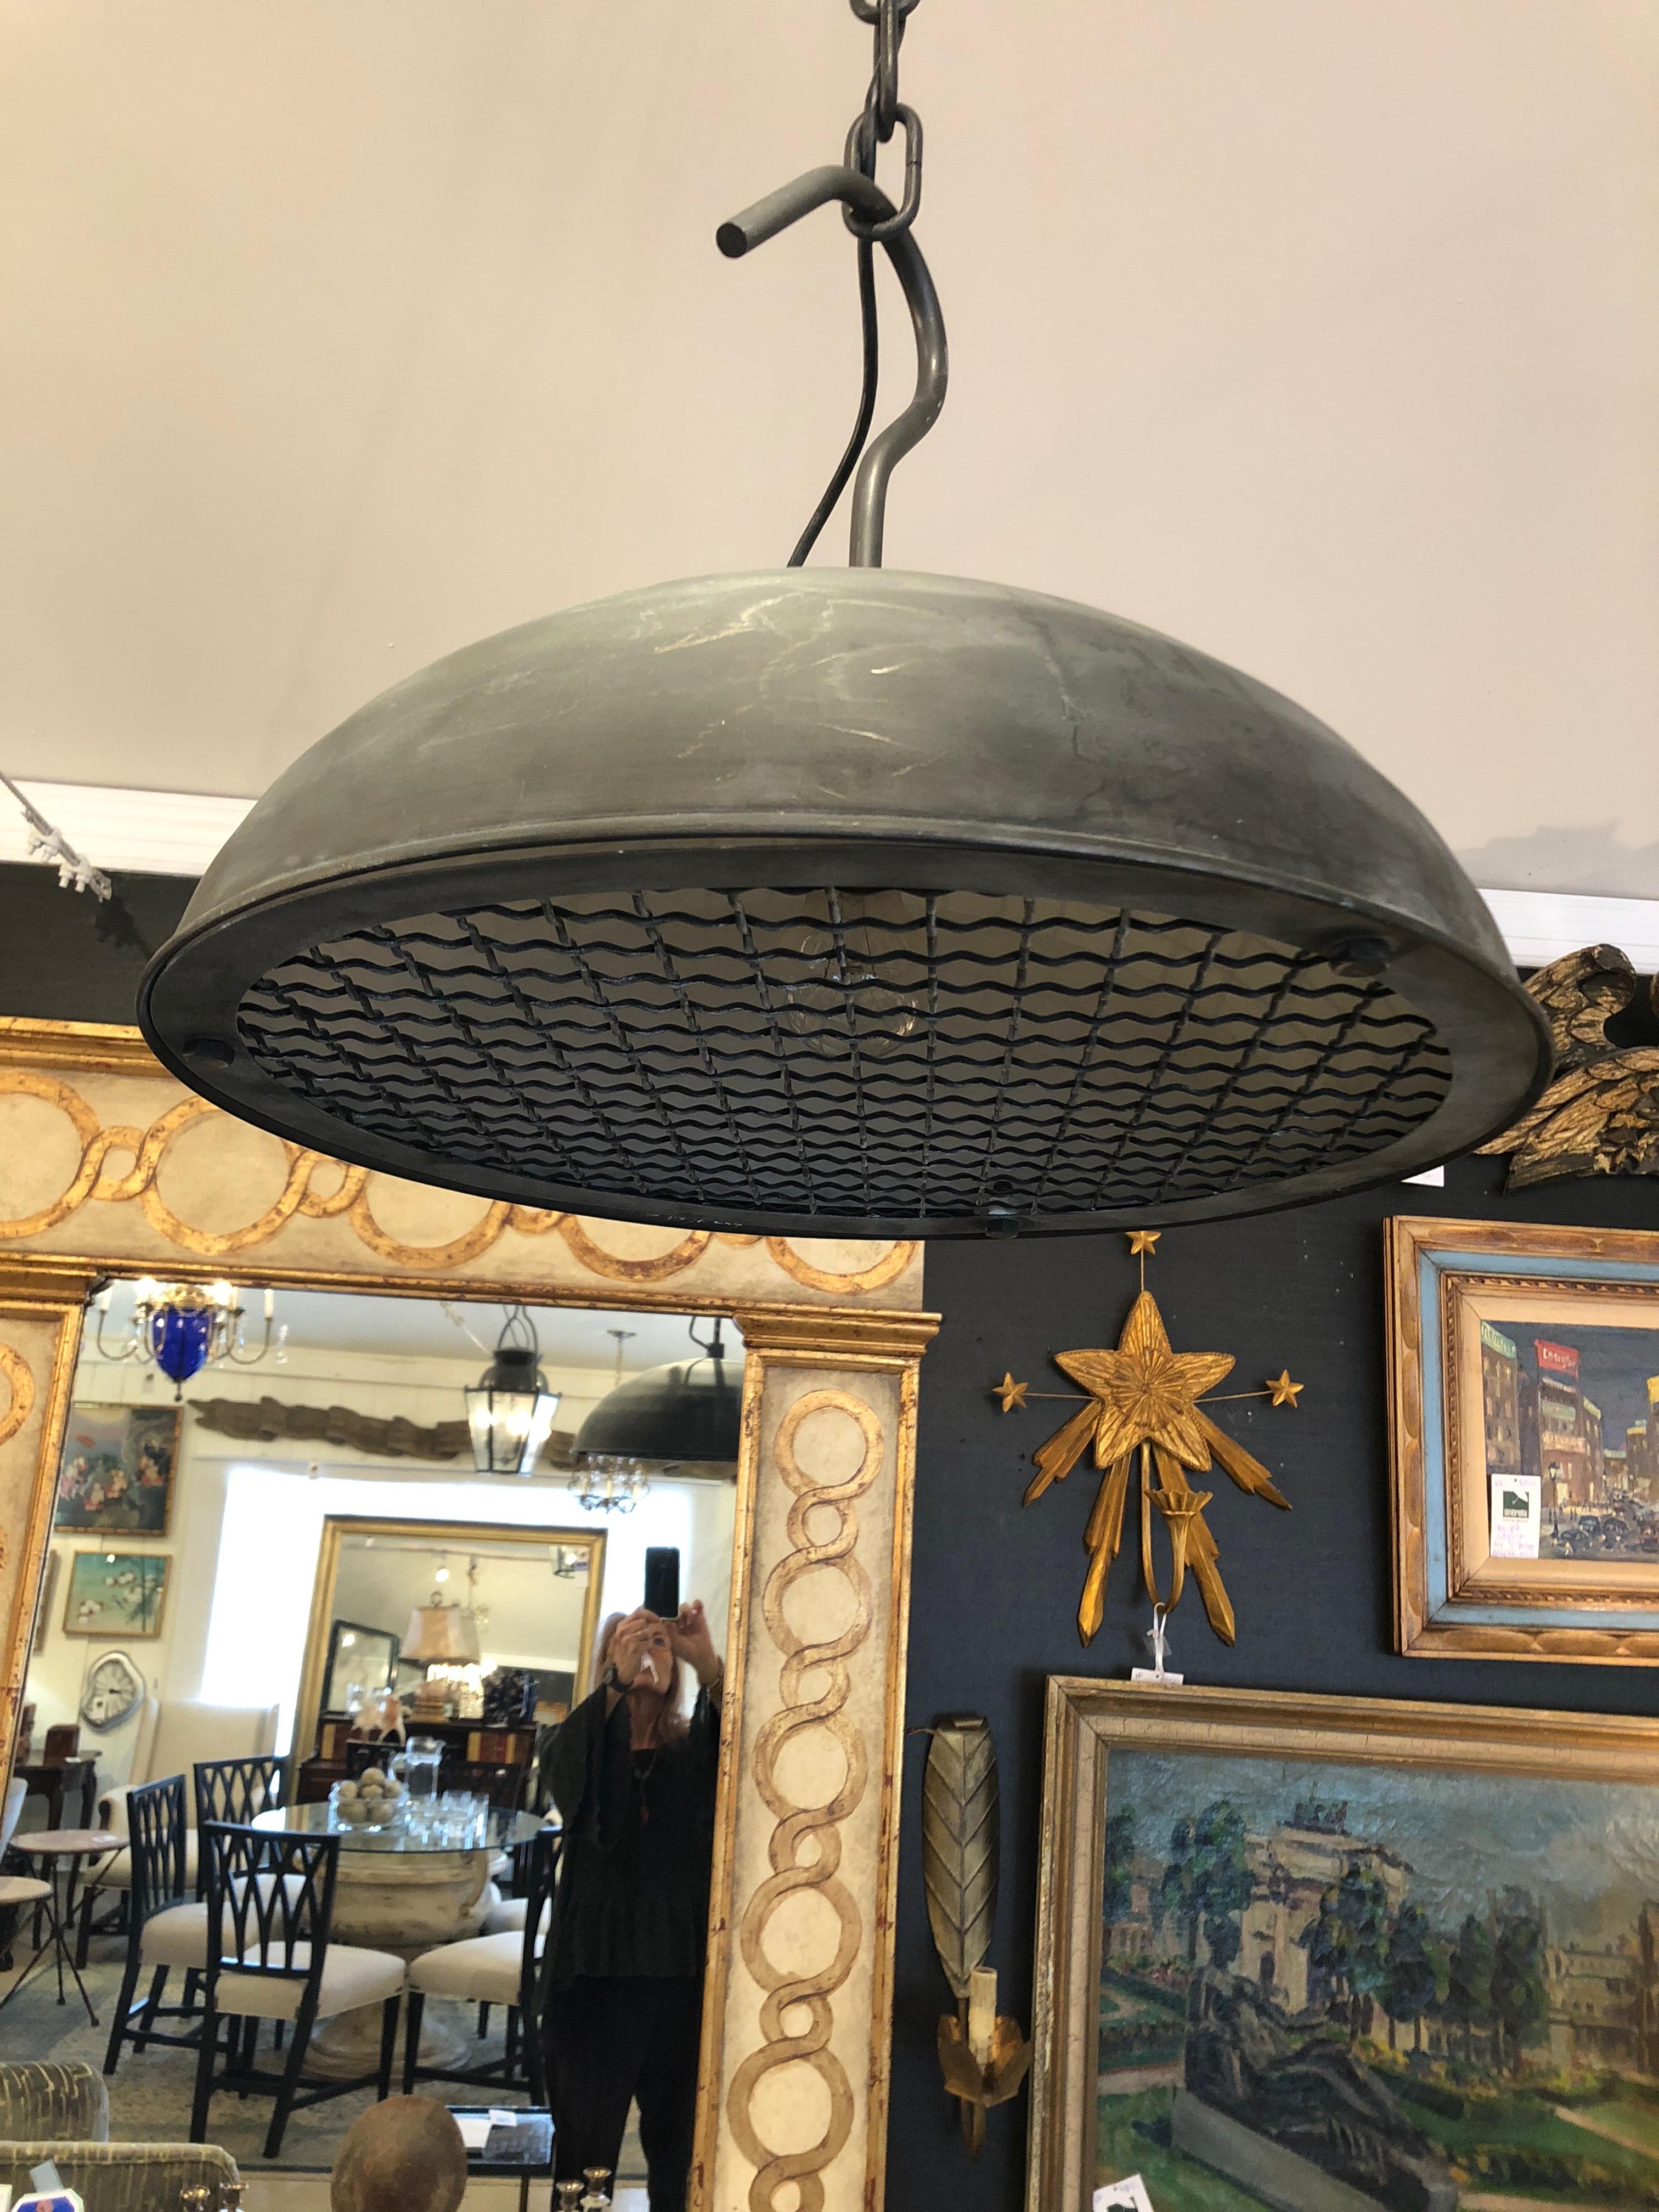 High end lighting company Urban Electric's versatile spin on an industrial warehouse light having a heavy mesh diffuser inspired by salvaged bronze furniture wire. An eye-catching outsized hook and an exposed black cord round out this statement